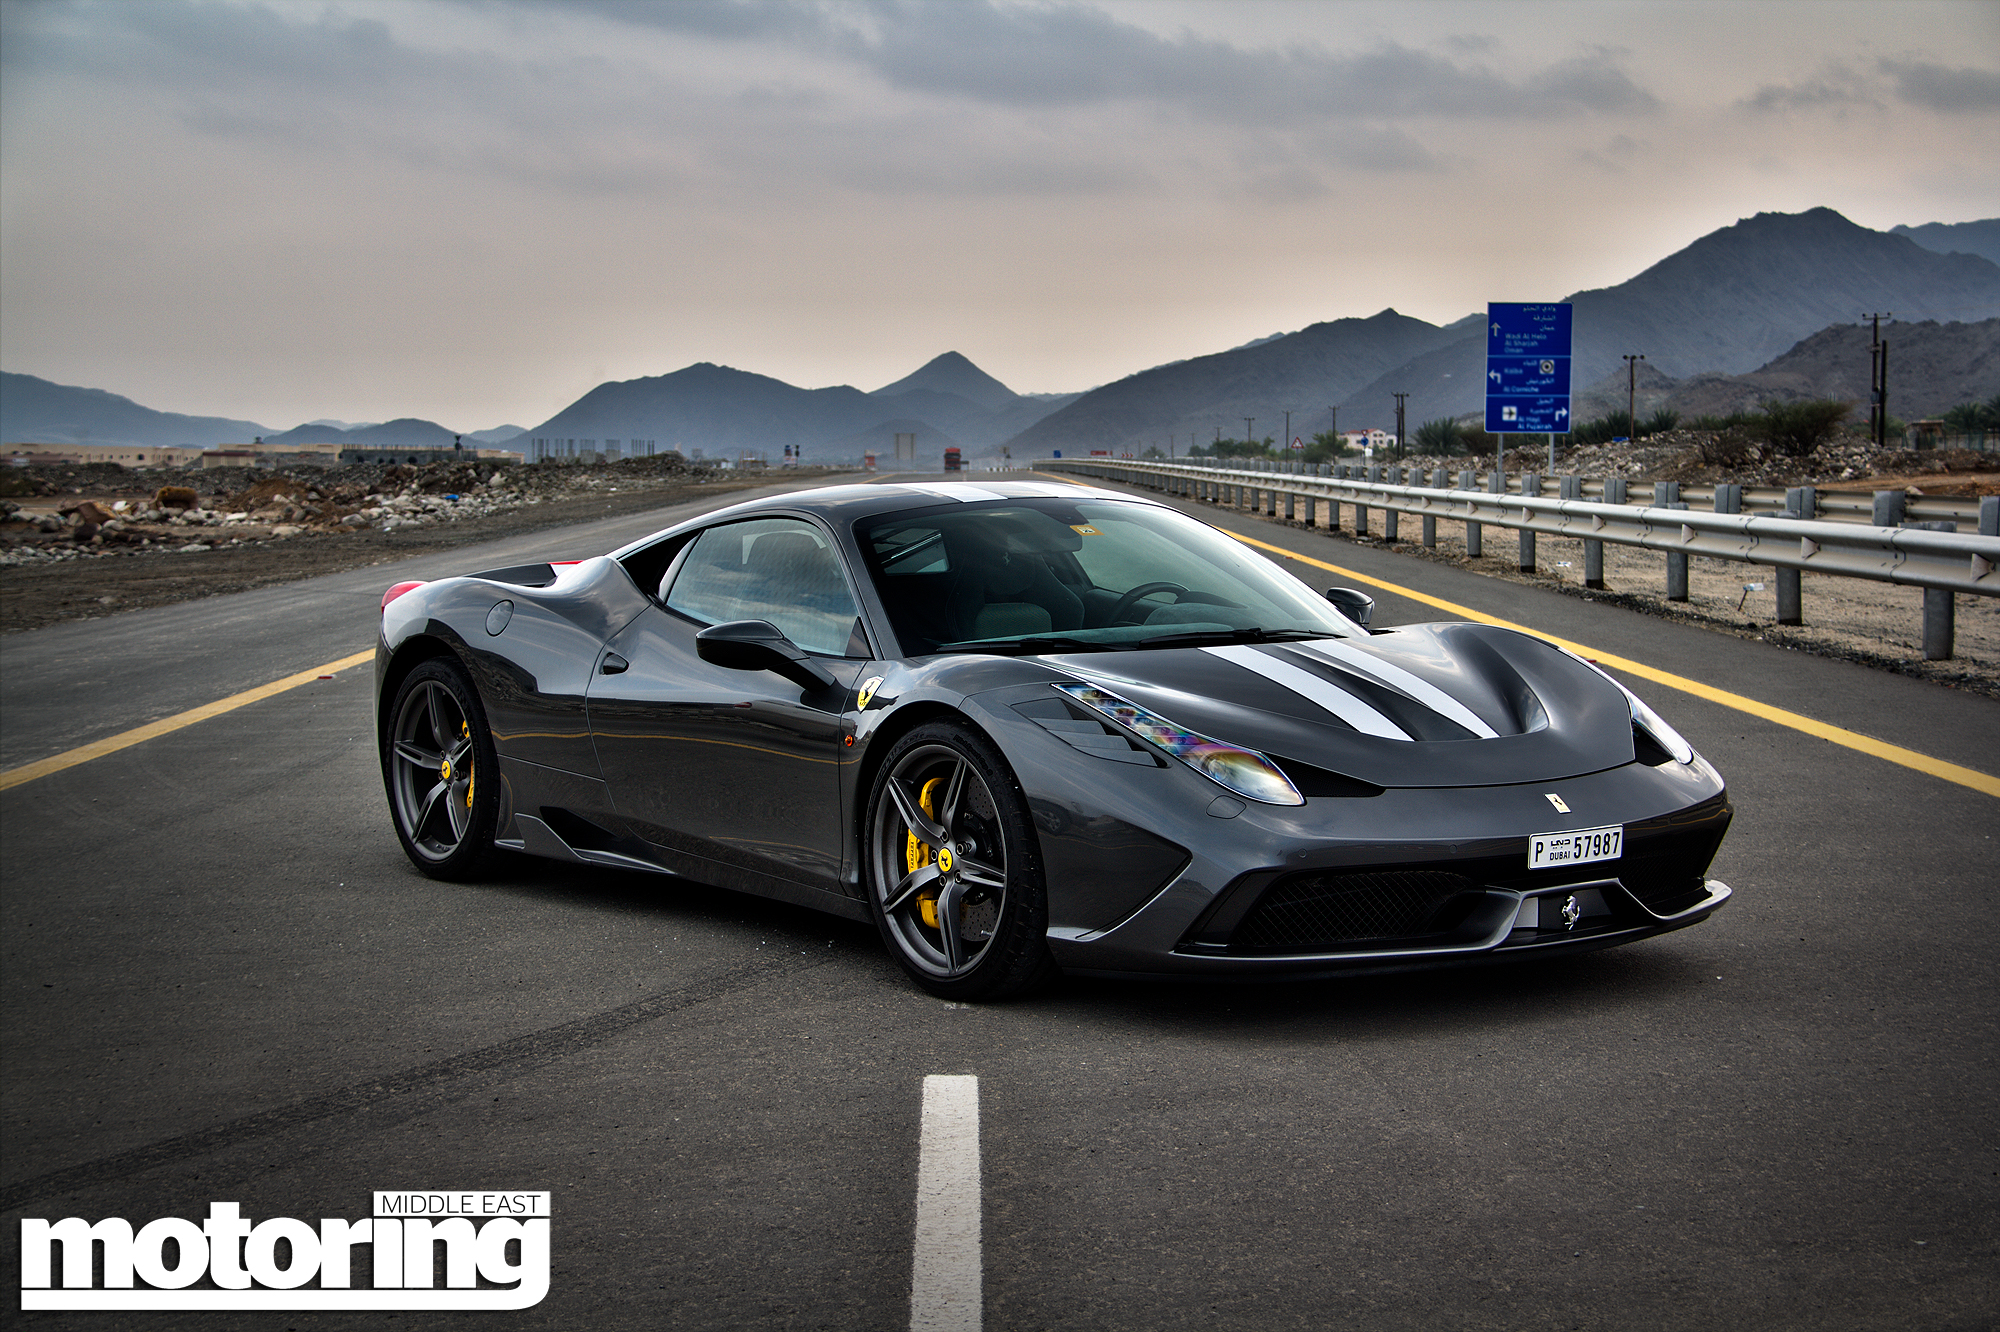 2014 Ferrari Speciale Middle East: Car news, Reviews and Buying guides